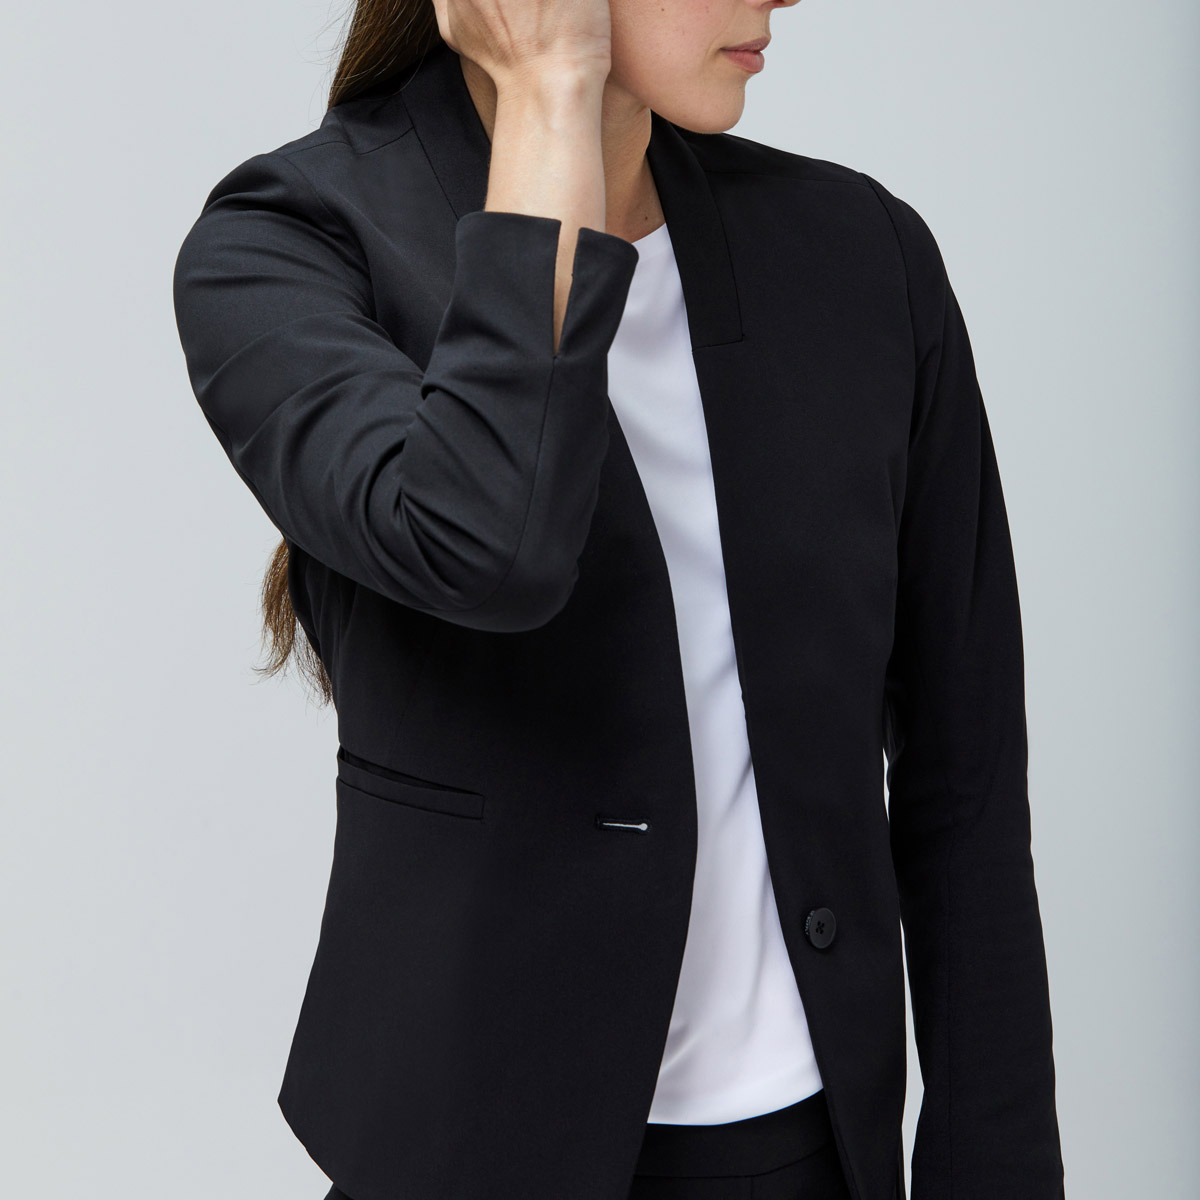 ministry of supply womens kinetic blazer